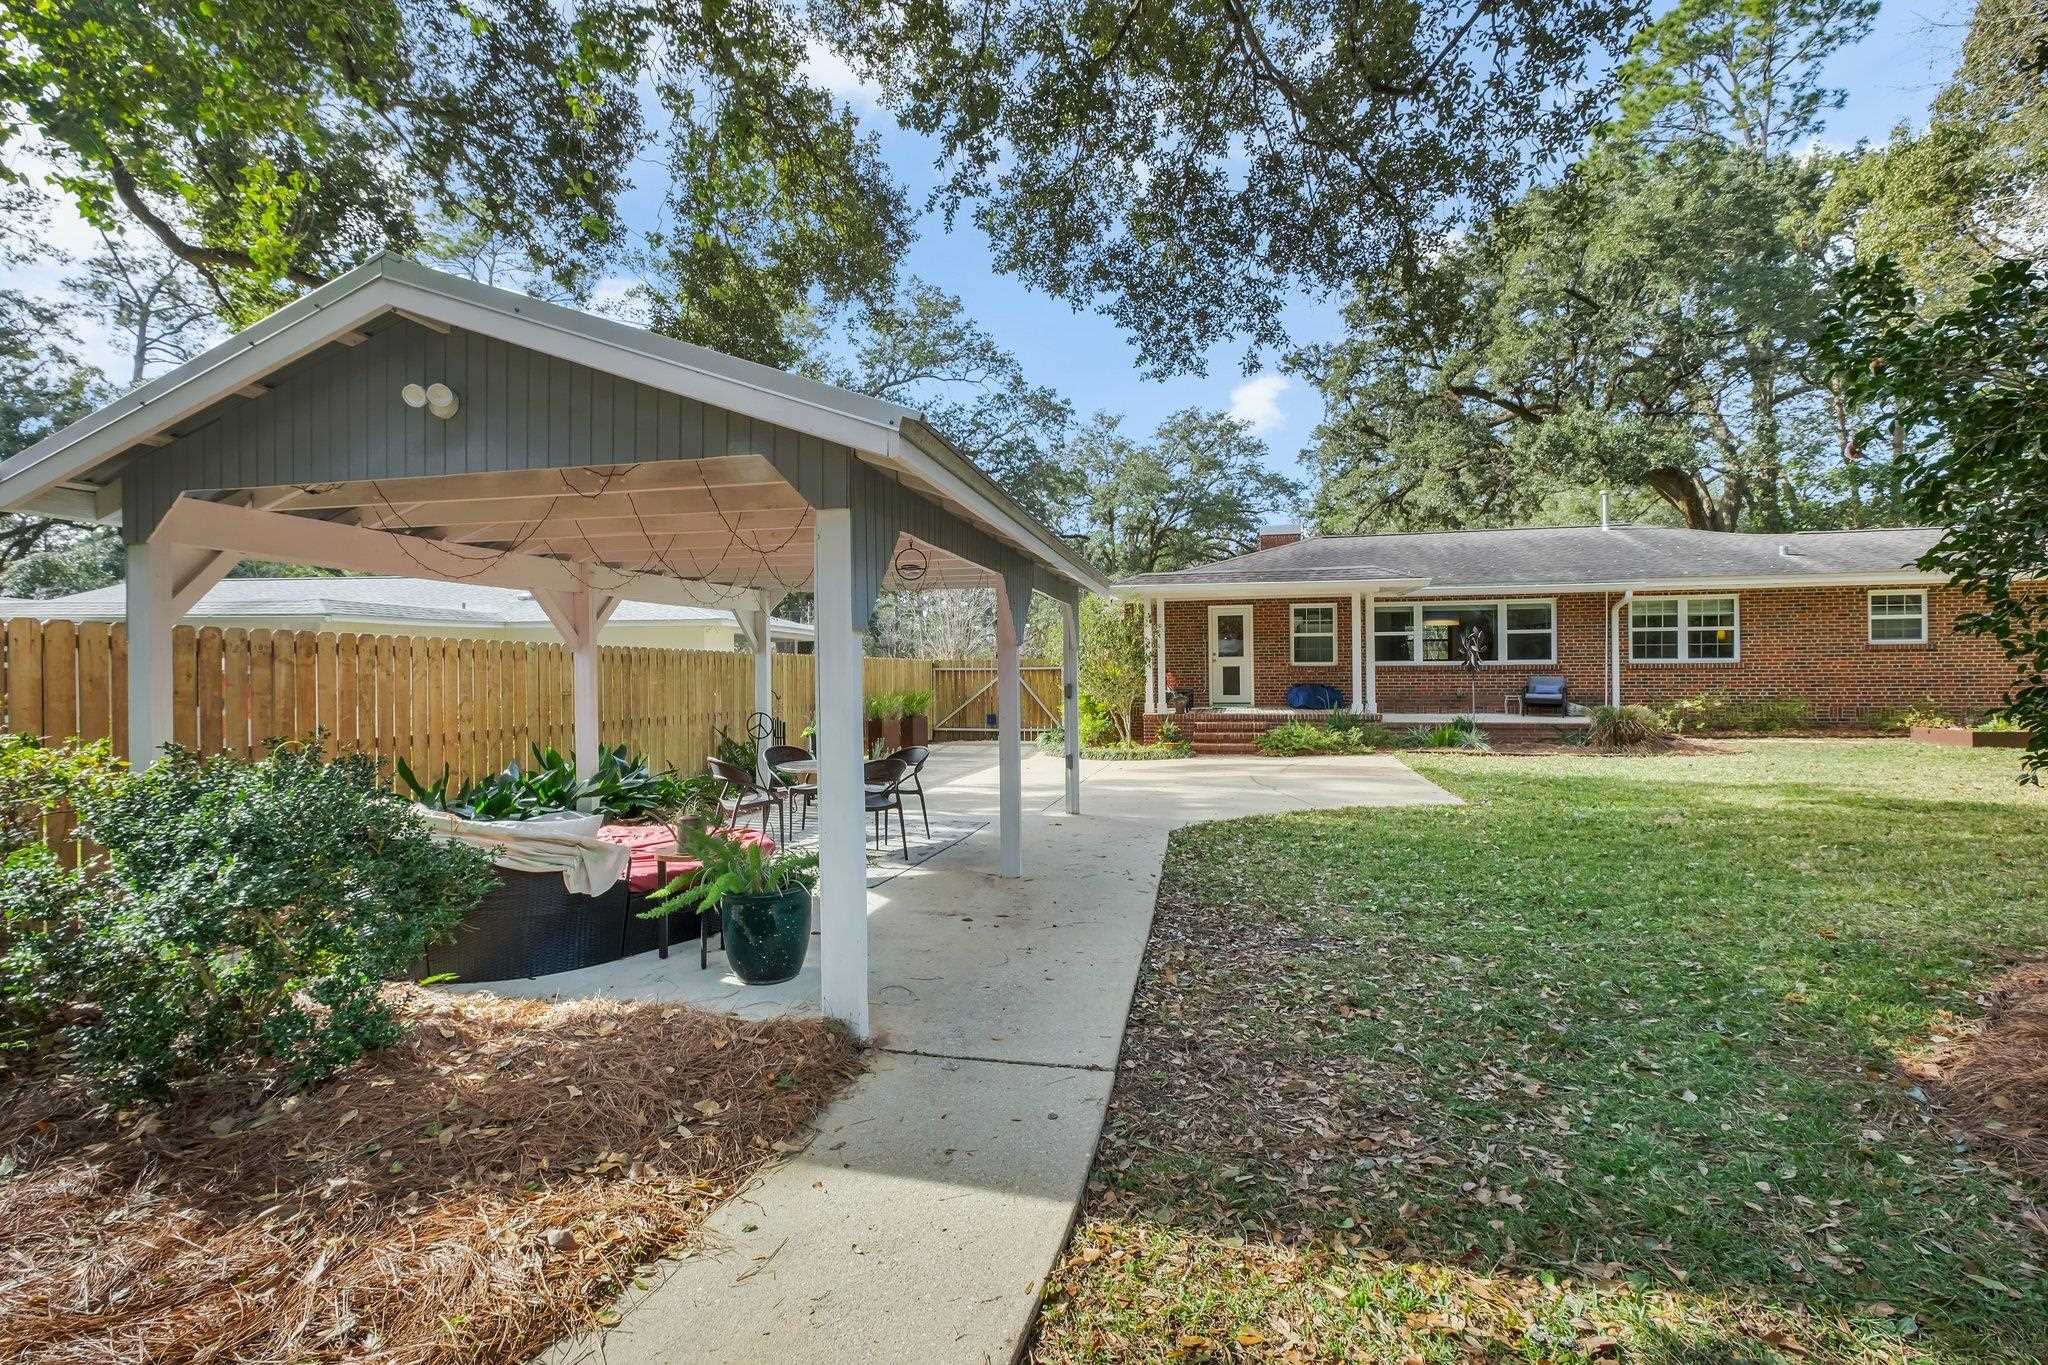 2109 Spence Avenue,TALLAHASSEE,Florida 32308,3 Bedrooms Bedrooms,2 BathroomsBathrooms,Detached single family,2109 Spence Avenue,369849